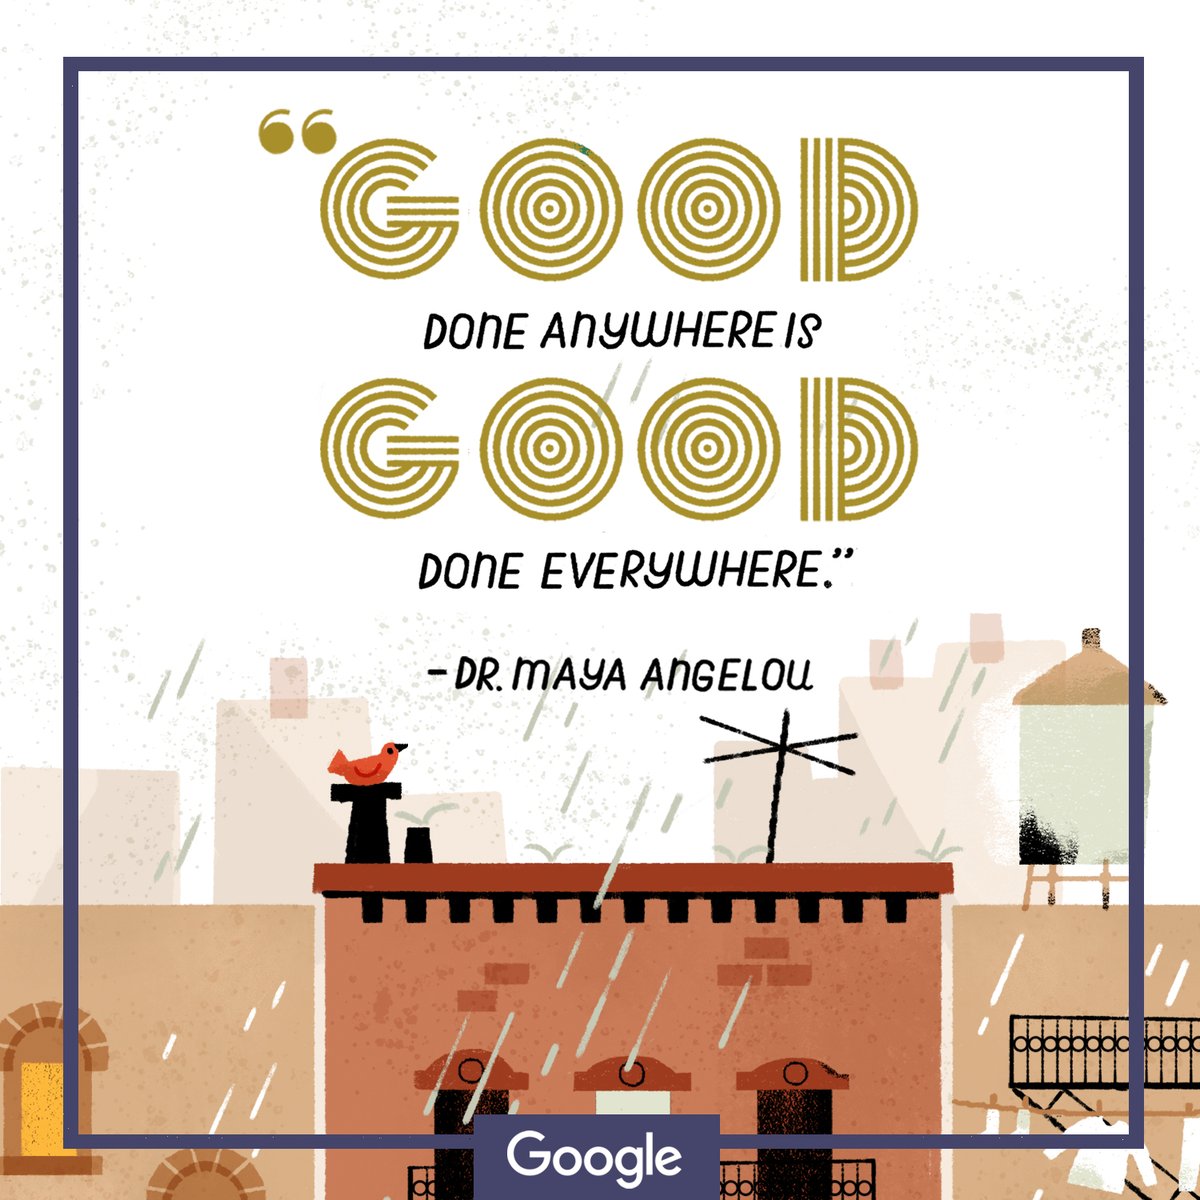 google-created quote in honor of Dr. Maya Angelou's 90th Birthday